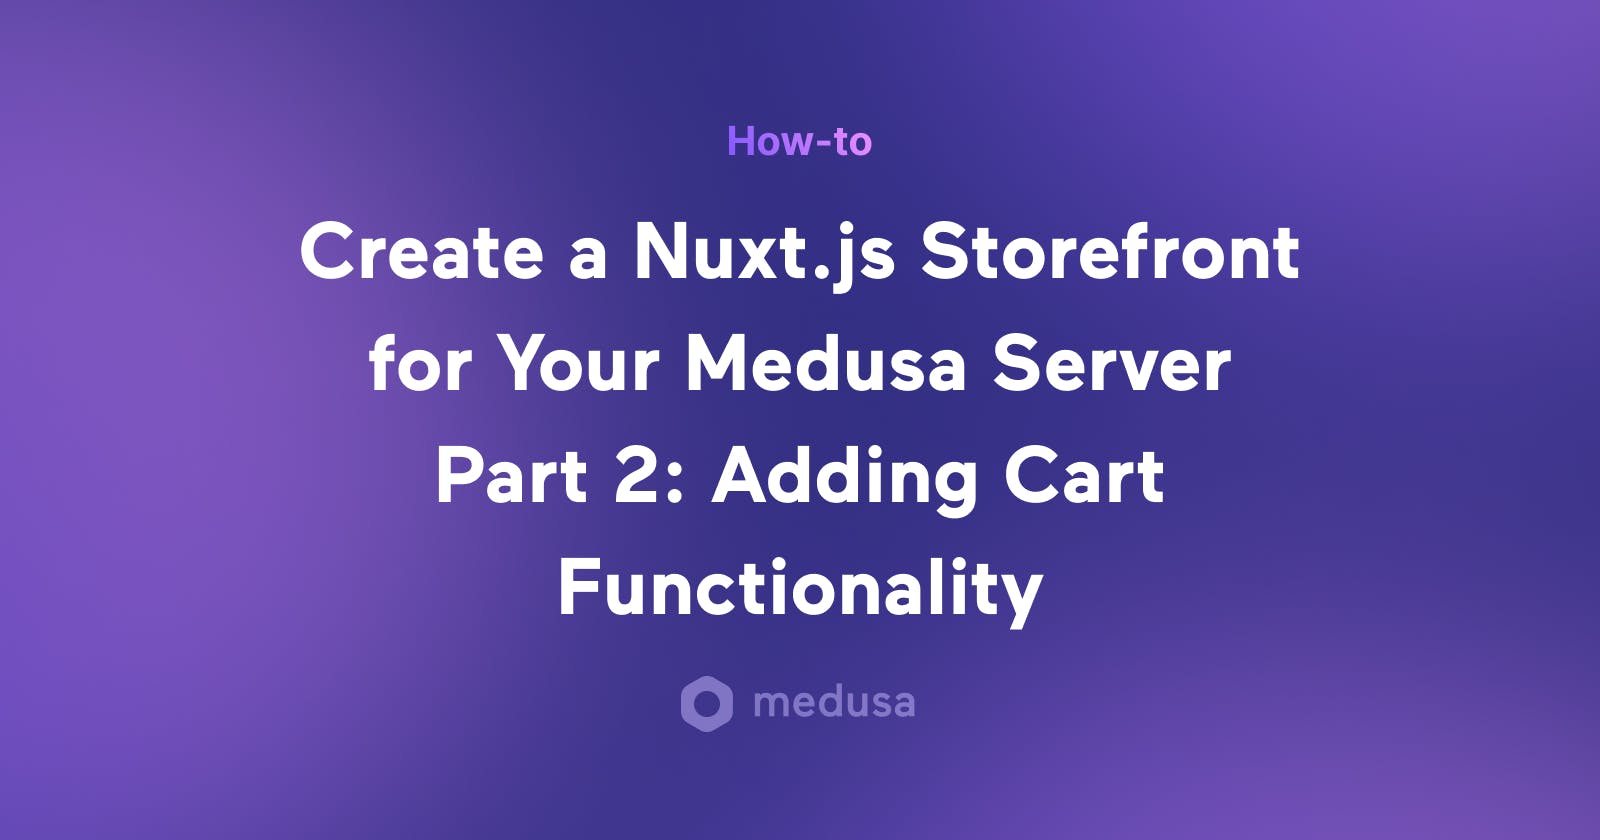 How I Created a Nuxt.js Ecommerce Store from Scratch Using Medusa Part 2: Adding Cart Functionality